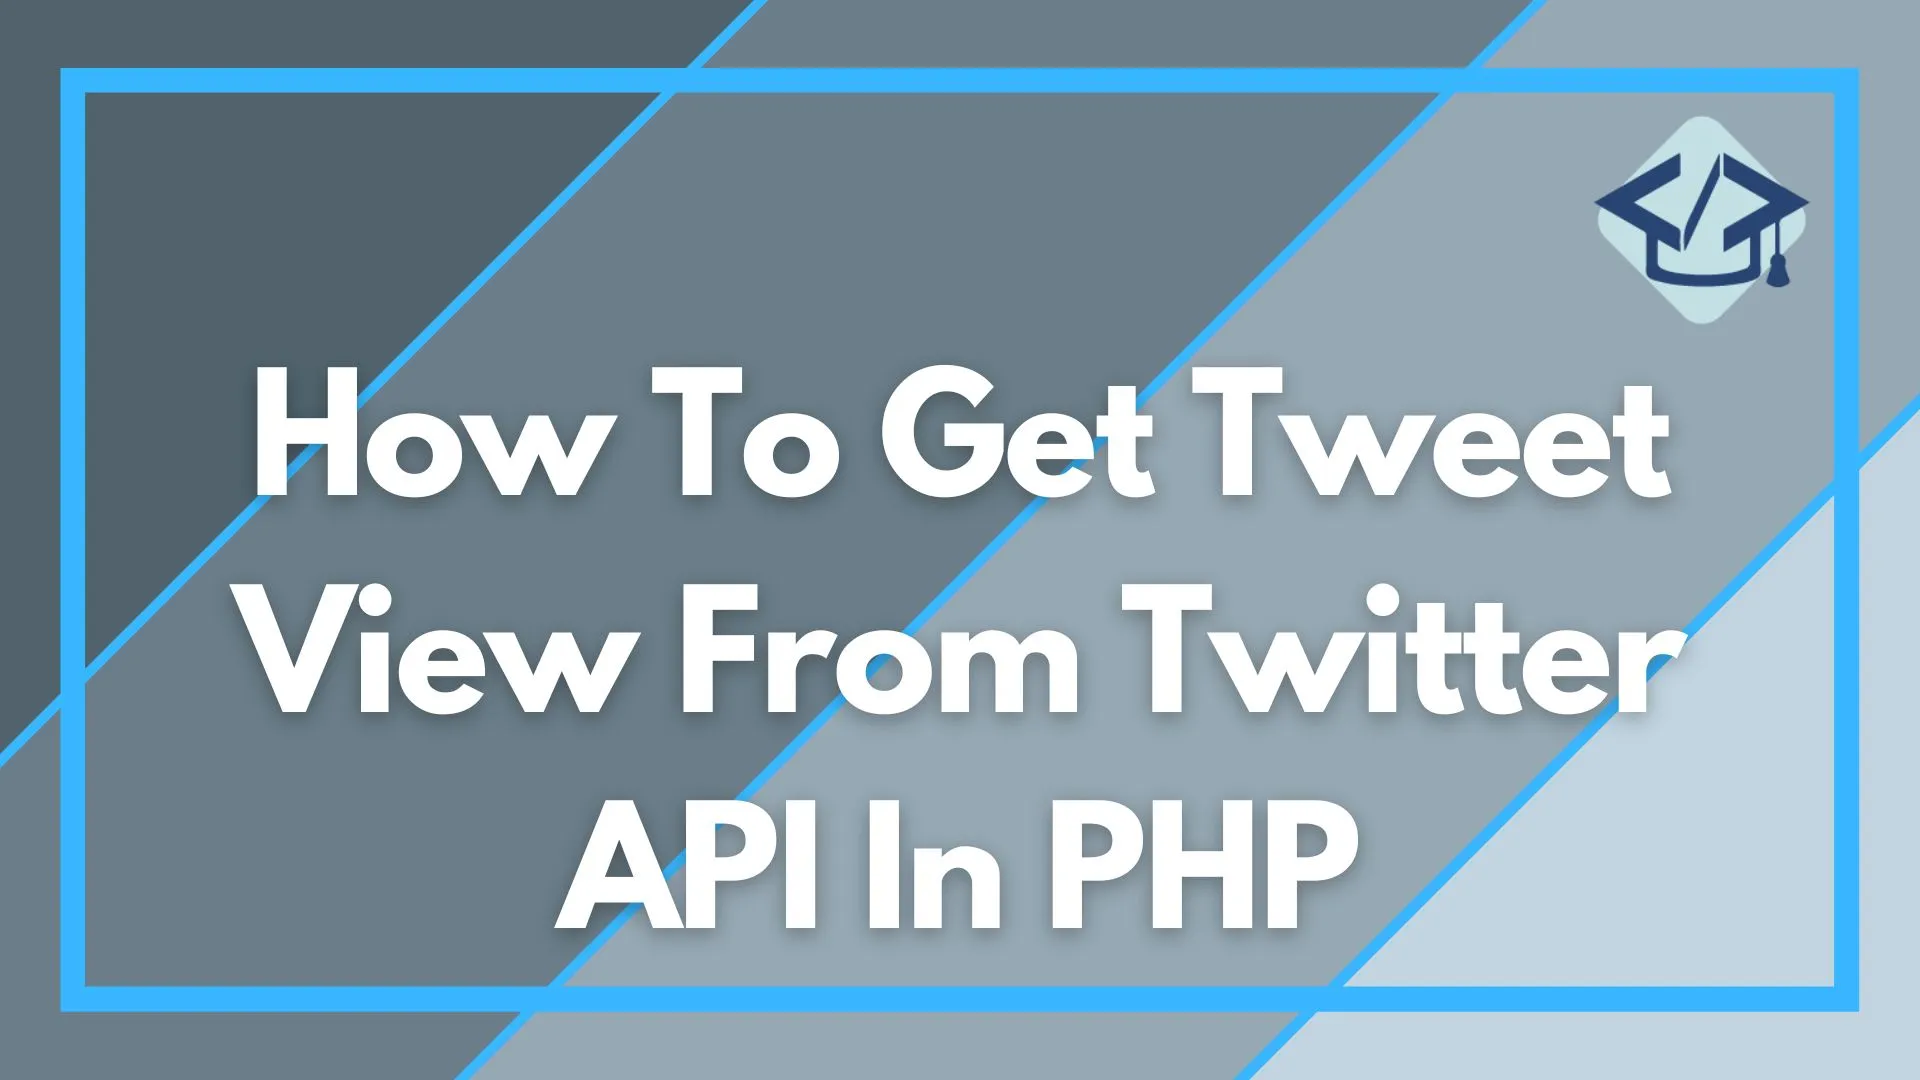 You are currently viewing how to get tweet view from twitter api in php